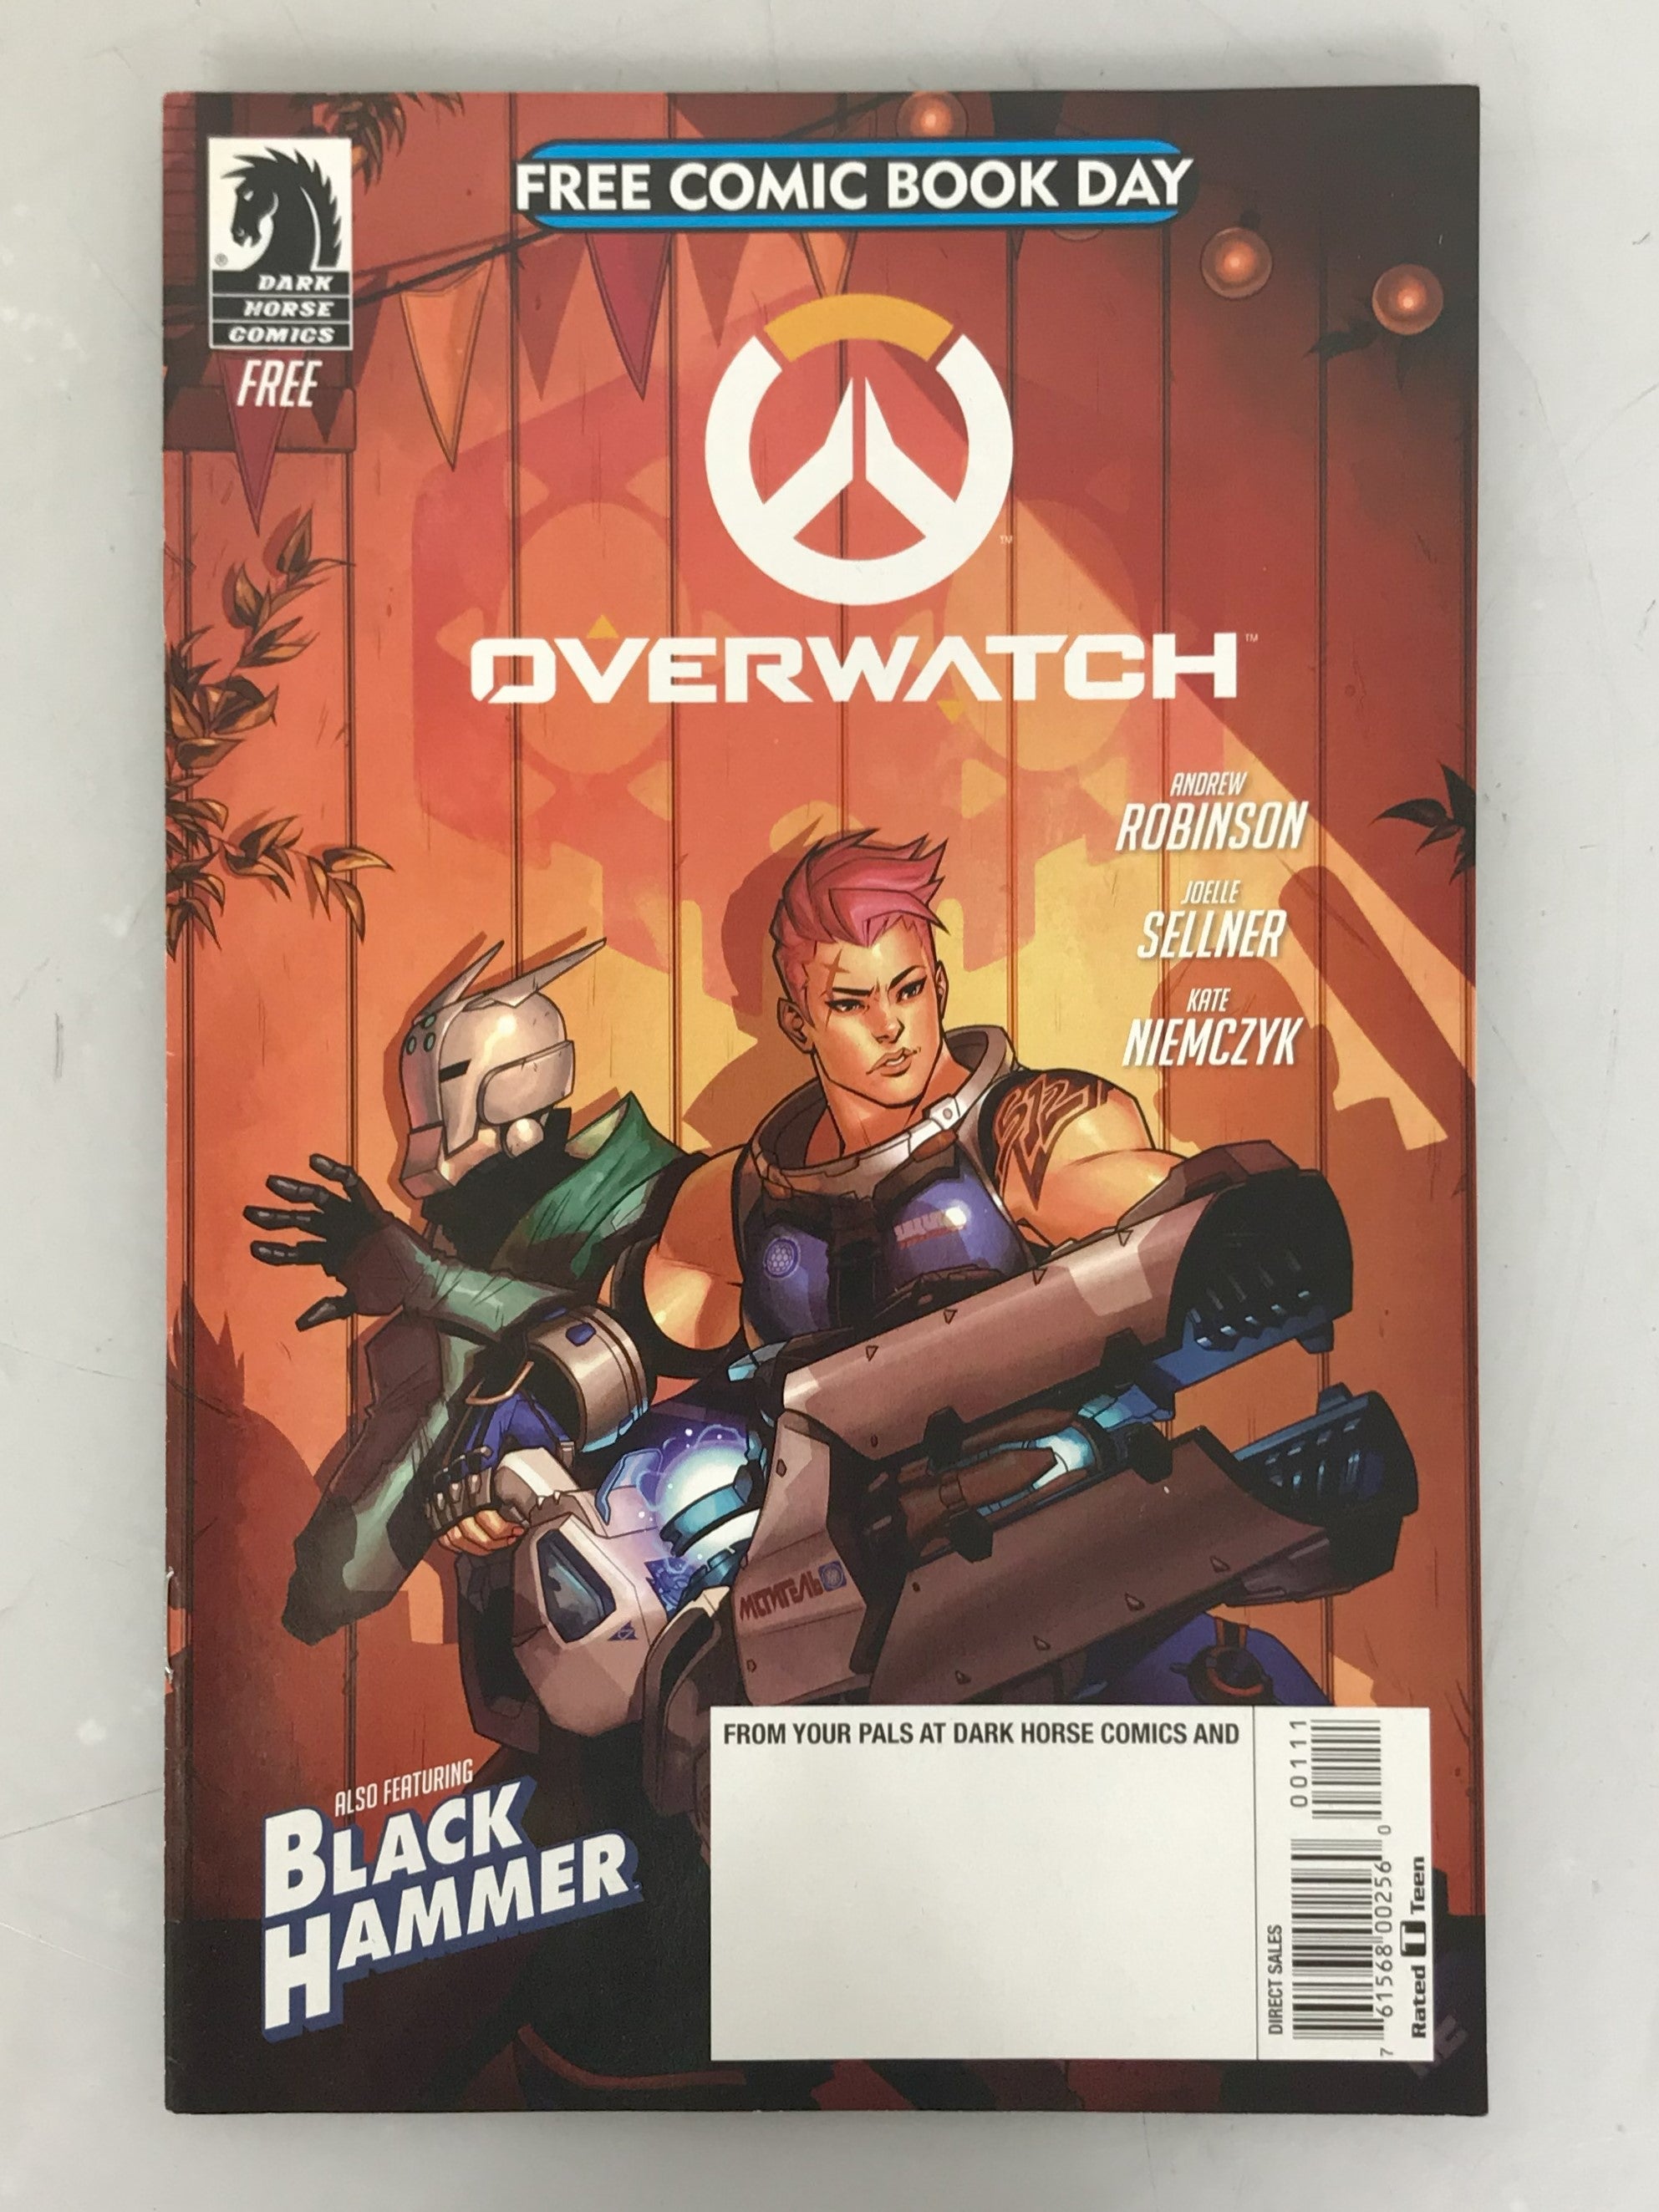 Overwatch Free Comic Book Day 2018